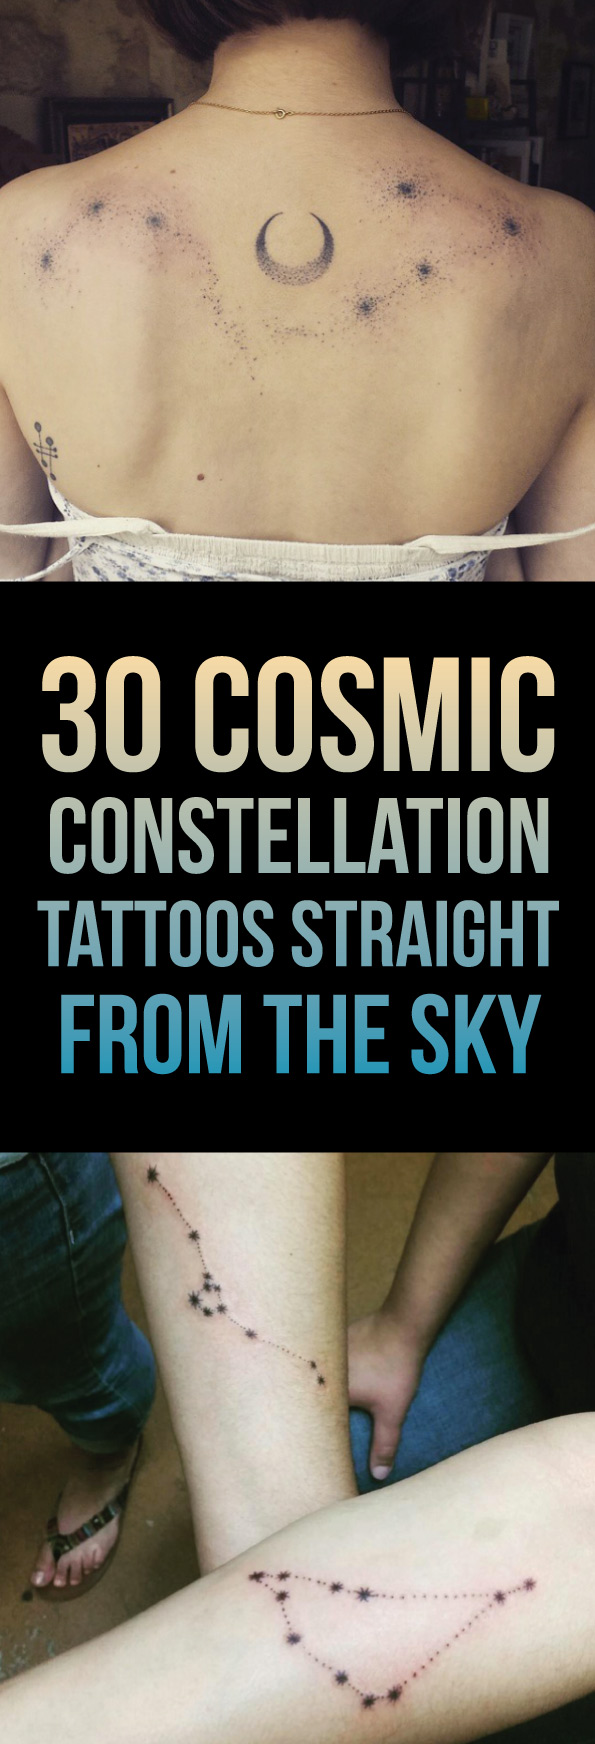 30 Cosmic Constellation Tattoos Straight From The Sky 